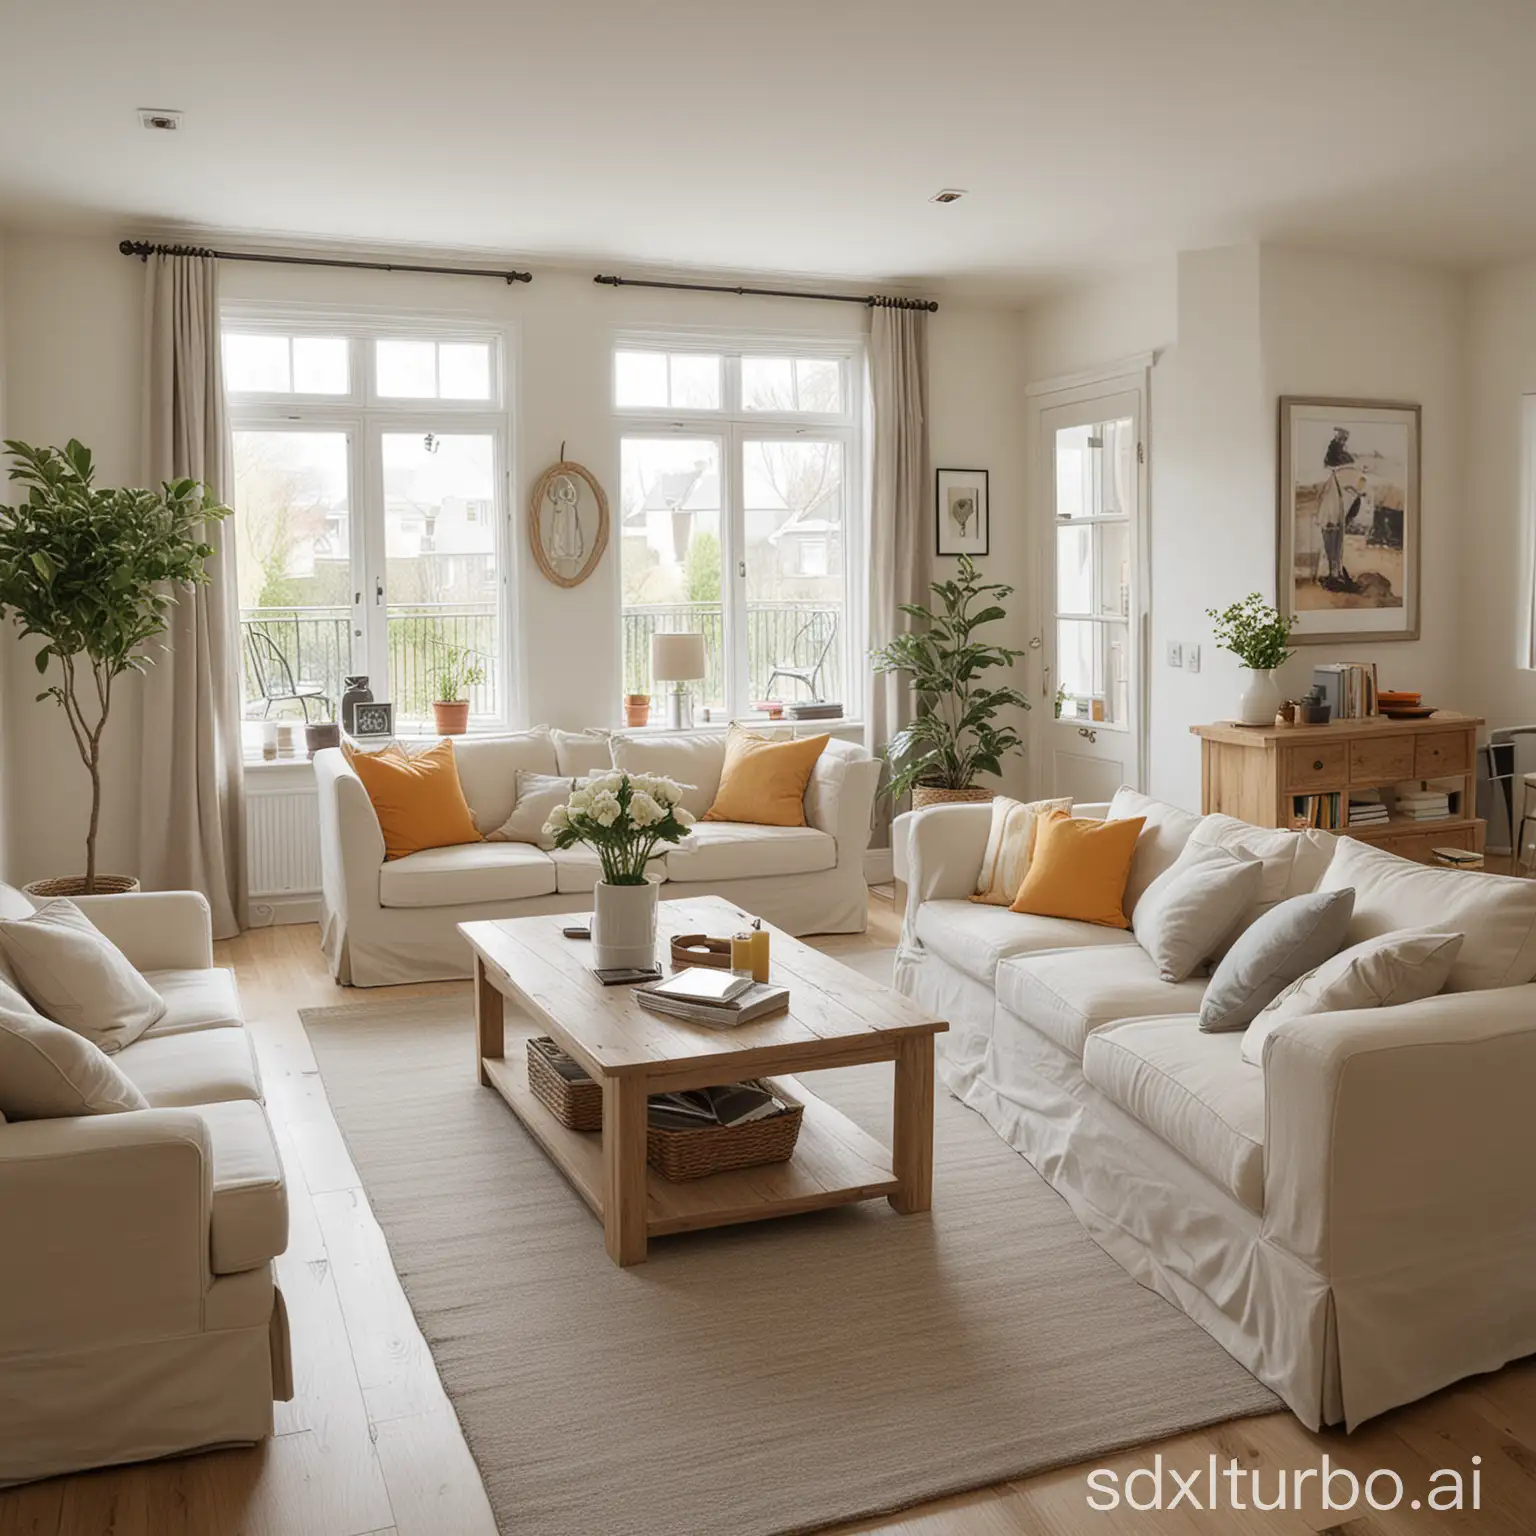 Bright-and-Airy-Living-Room-with-Inviting-Furniture-Arrangement